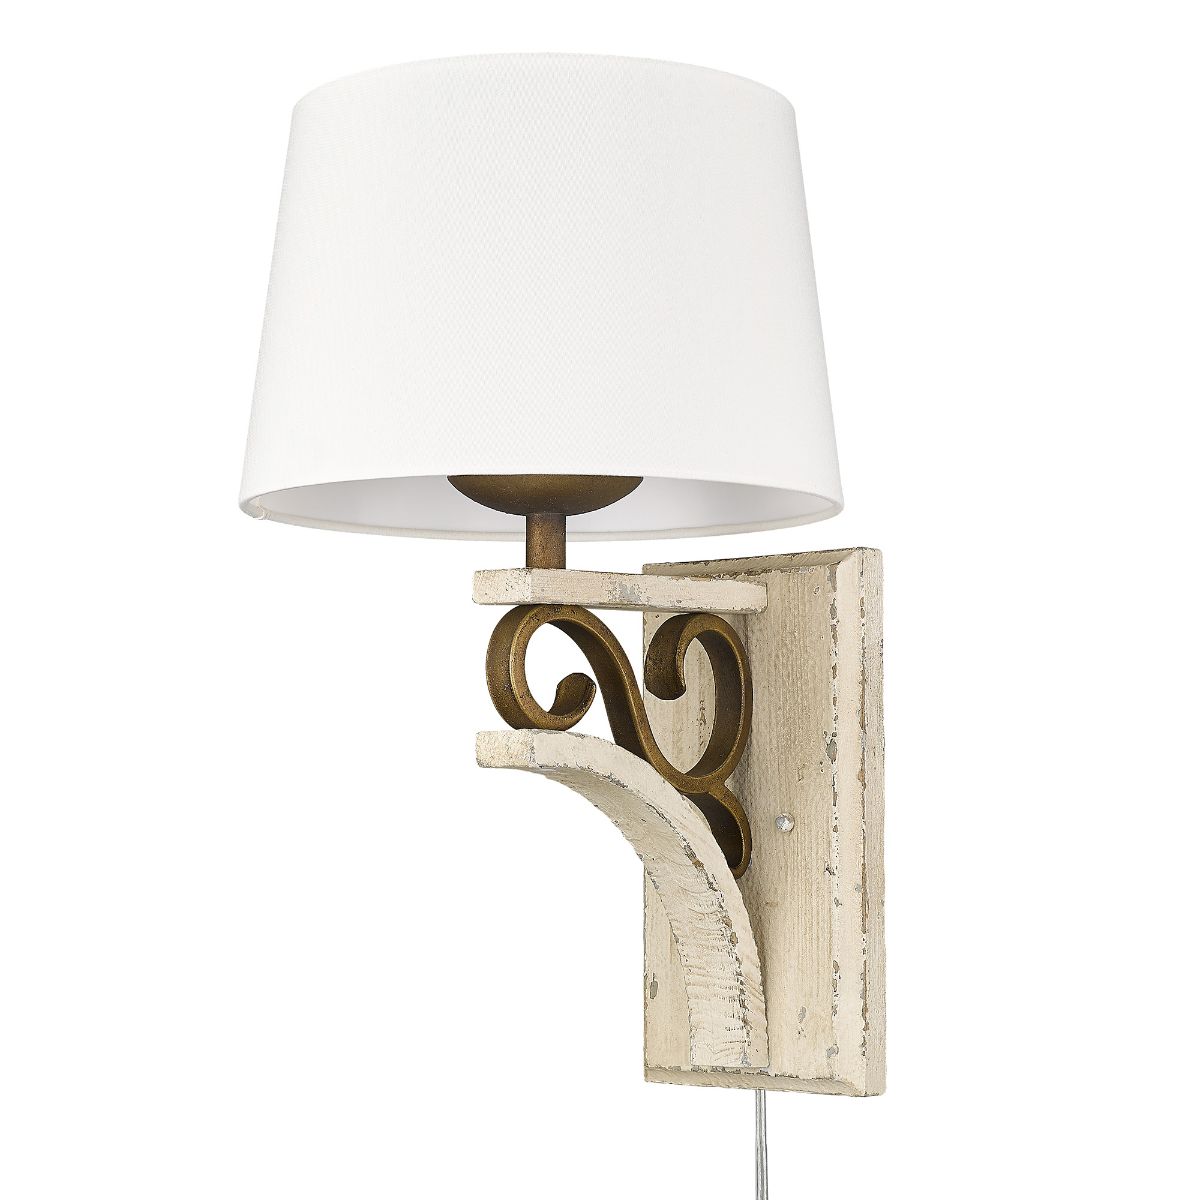 Solay 21 in. Flush Mount Wall Sconce Bronze Finish